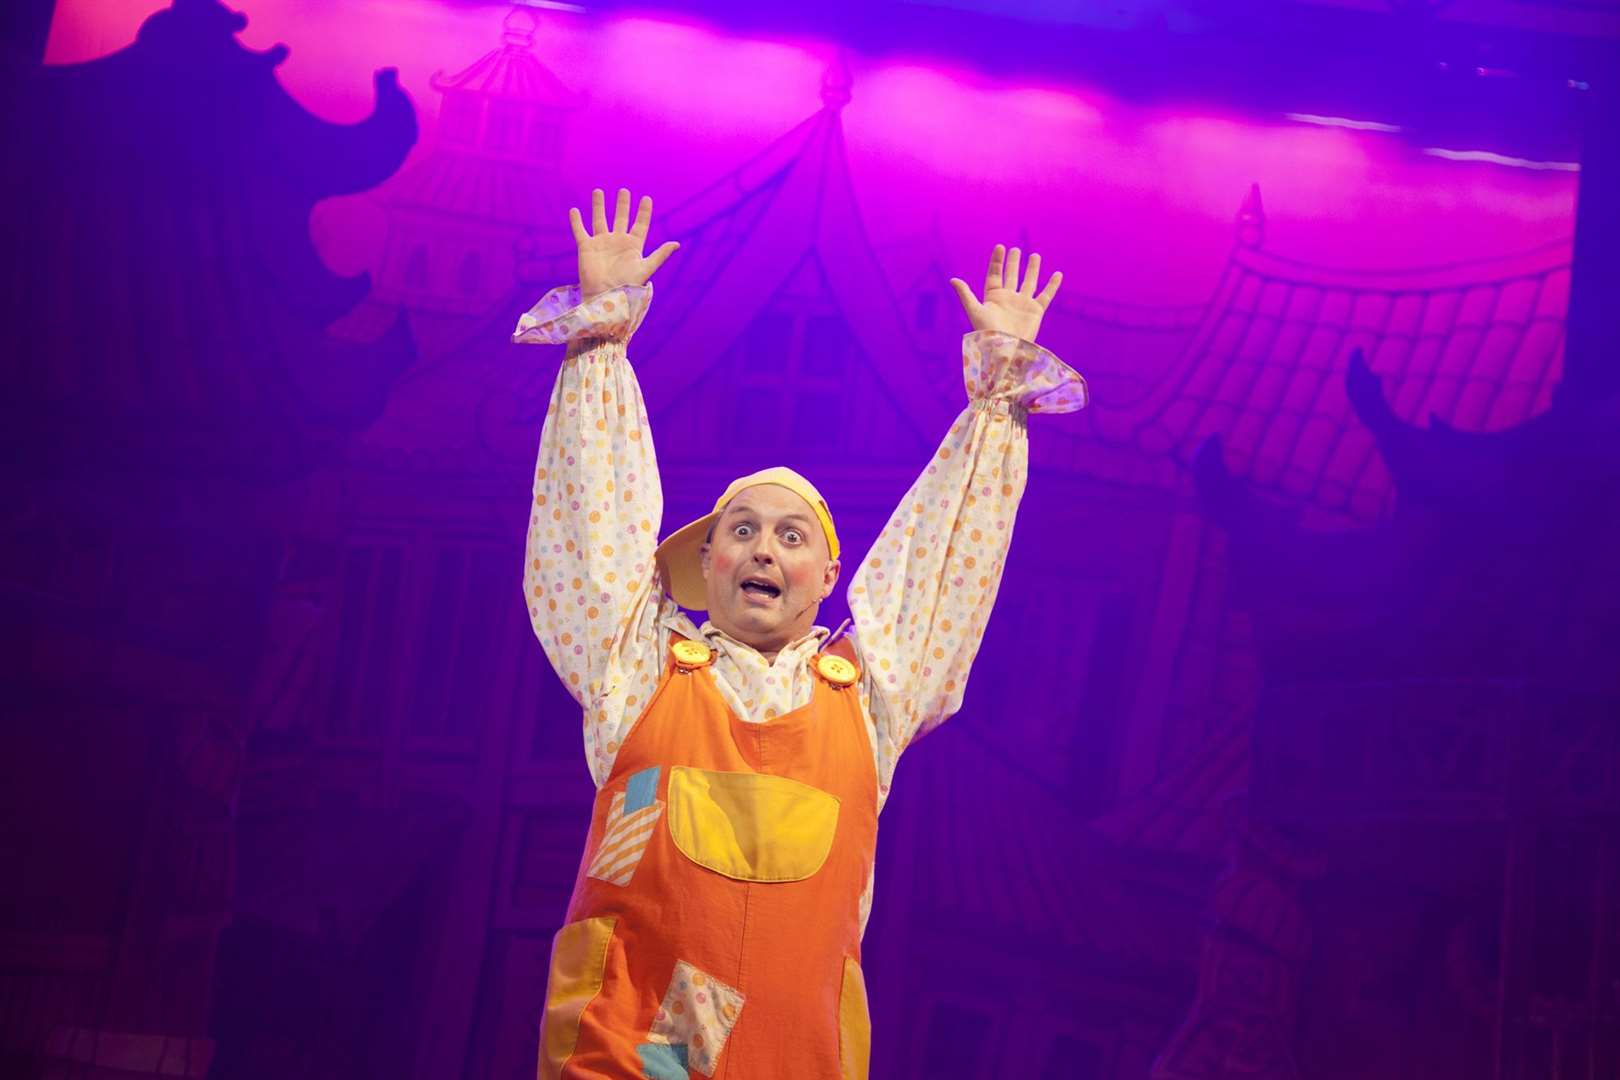 Aladdin was the pantomime show at Gravesend's The Woodville in 2015